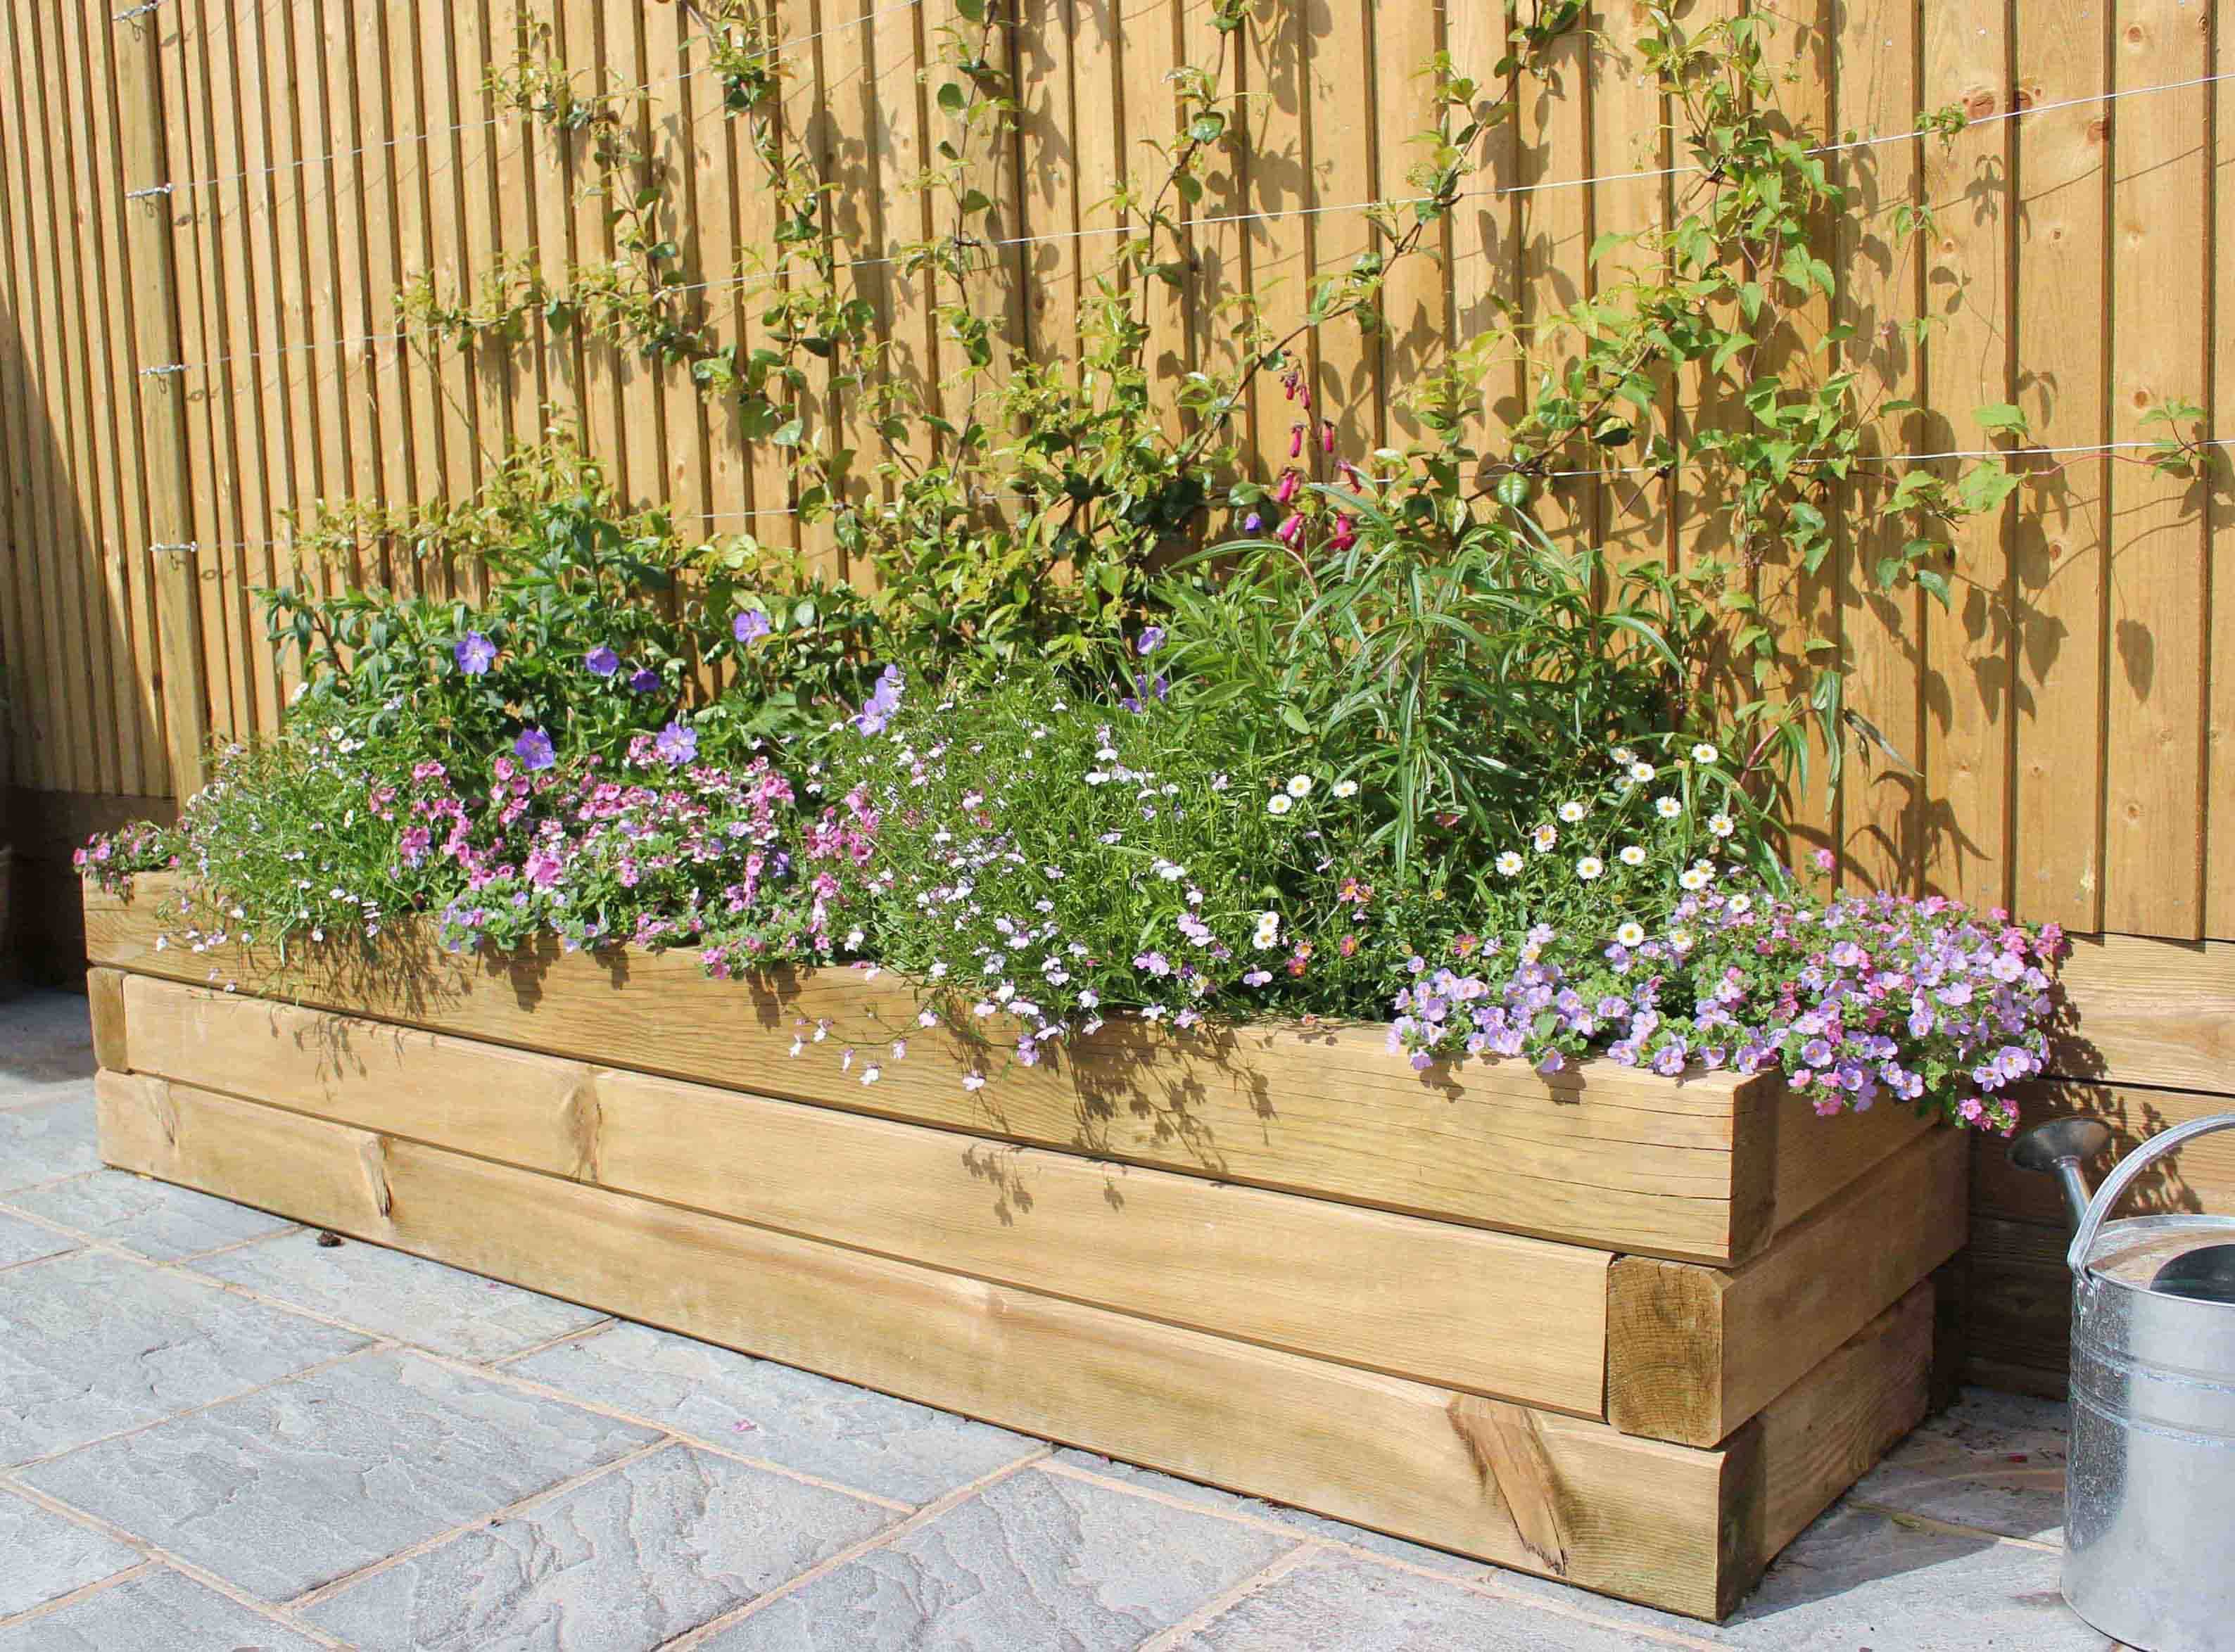 A Raised Wooden Planter